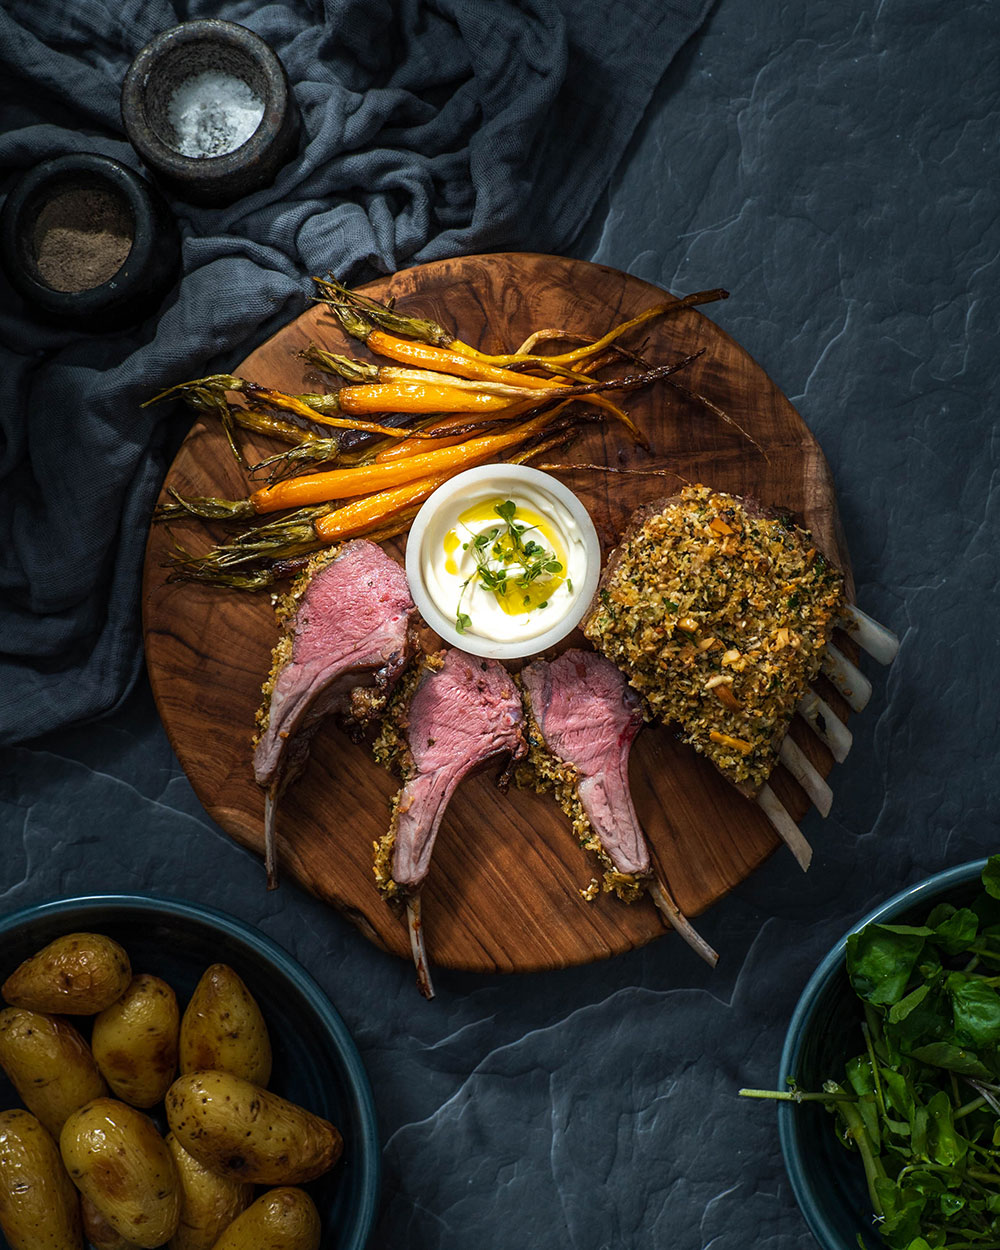 The Honest Grocer crusted lamb rack with baby carrots, potatoes and side salad